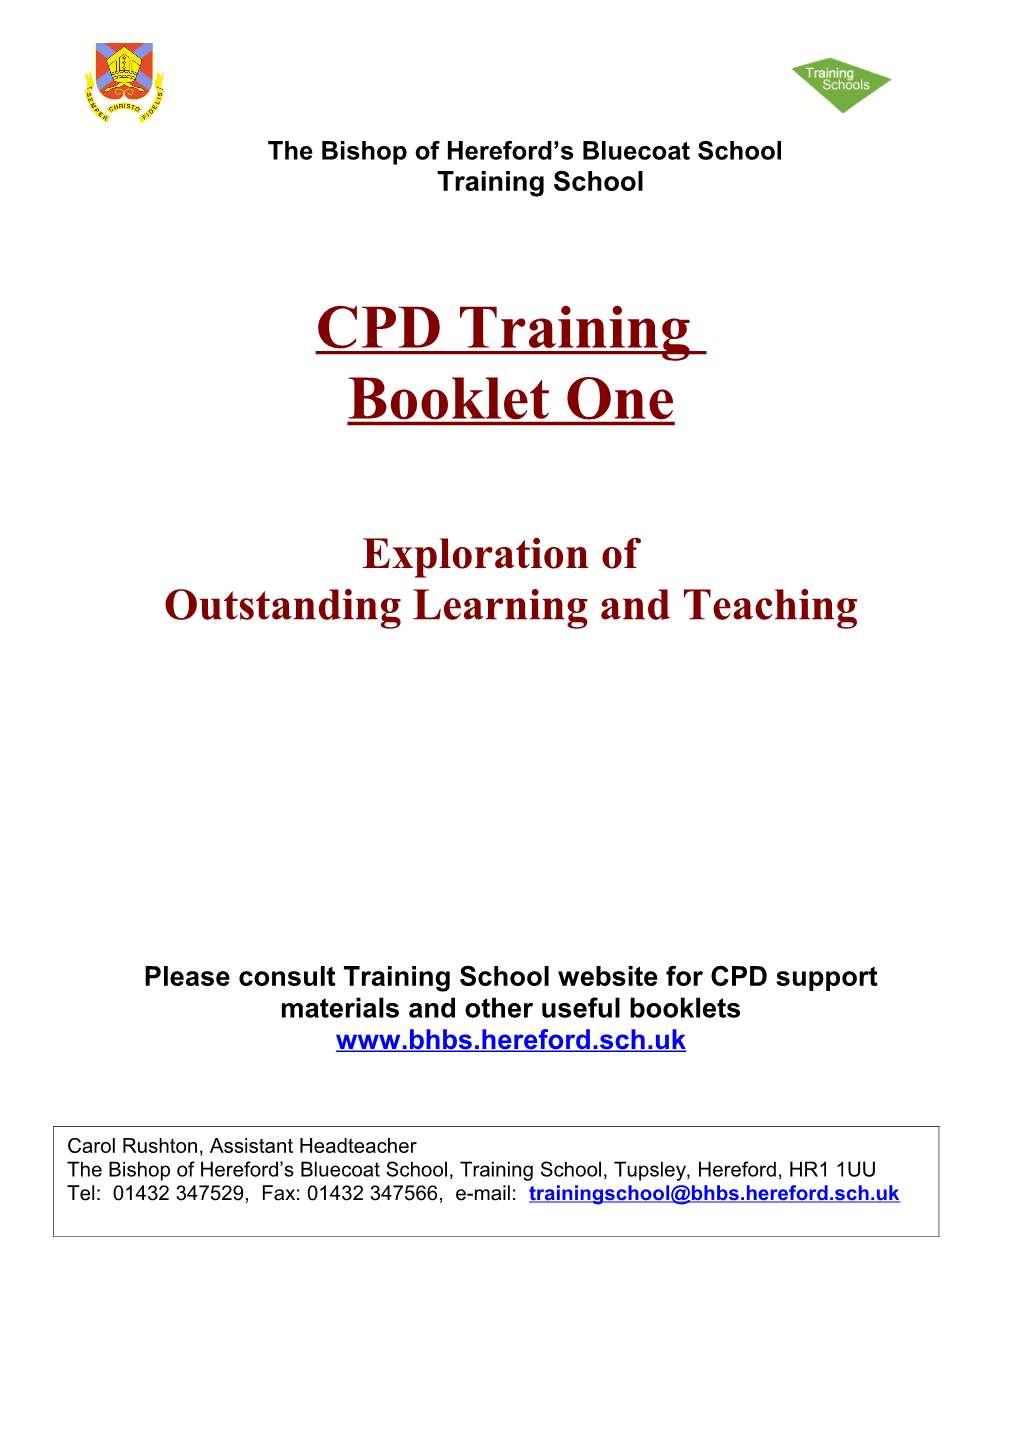 CPD Training Booklet One